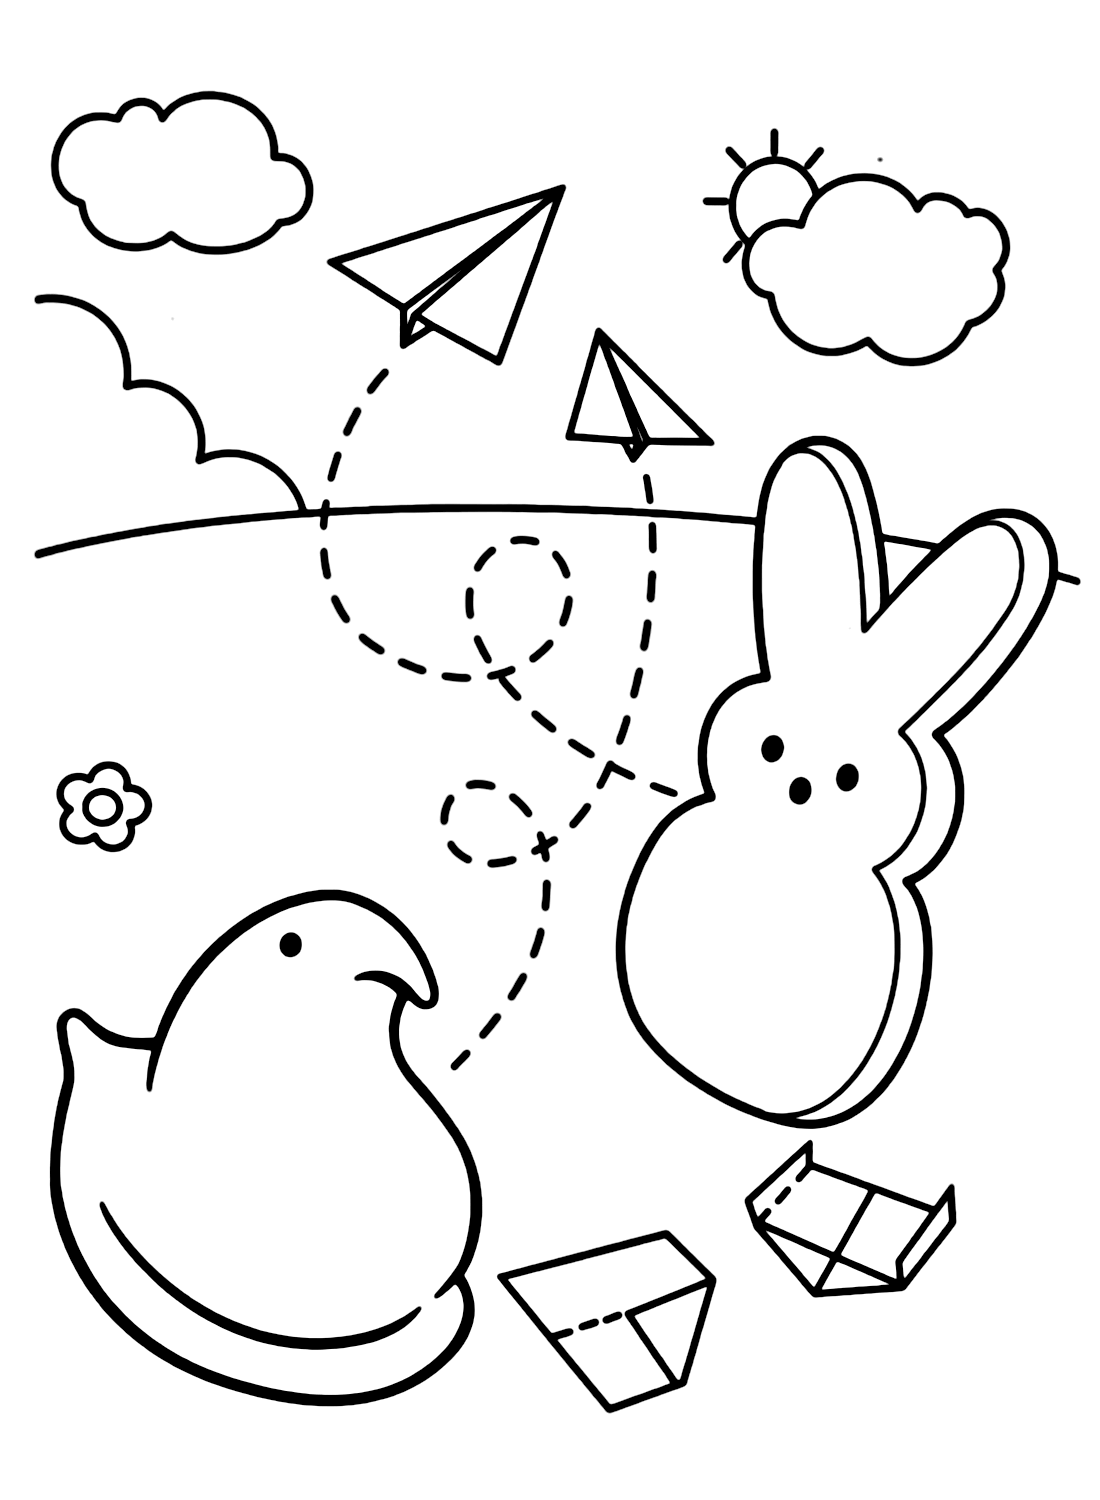 Marshmallow Peeps Free Coloring Page